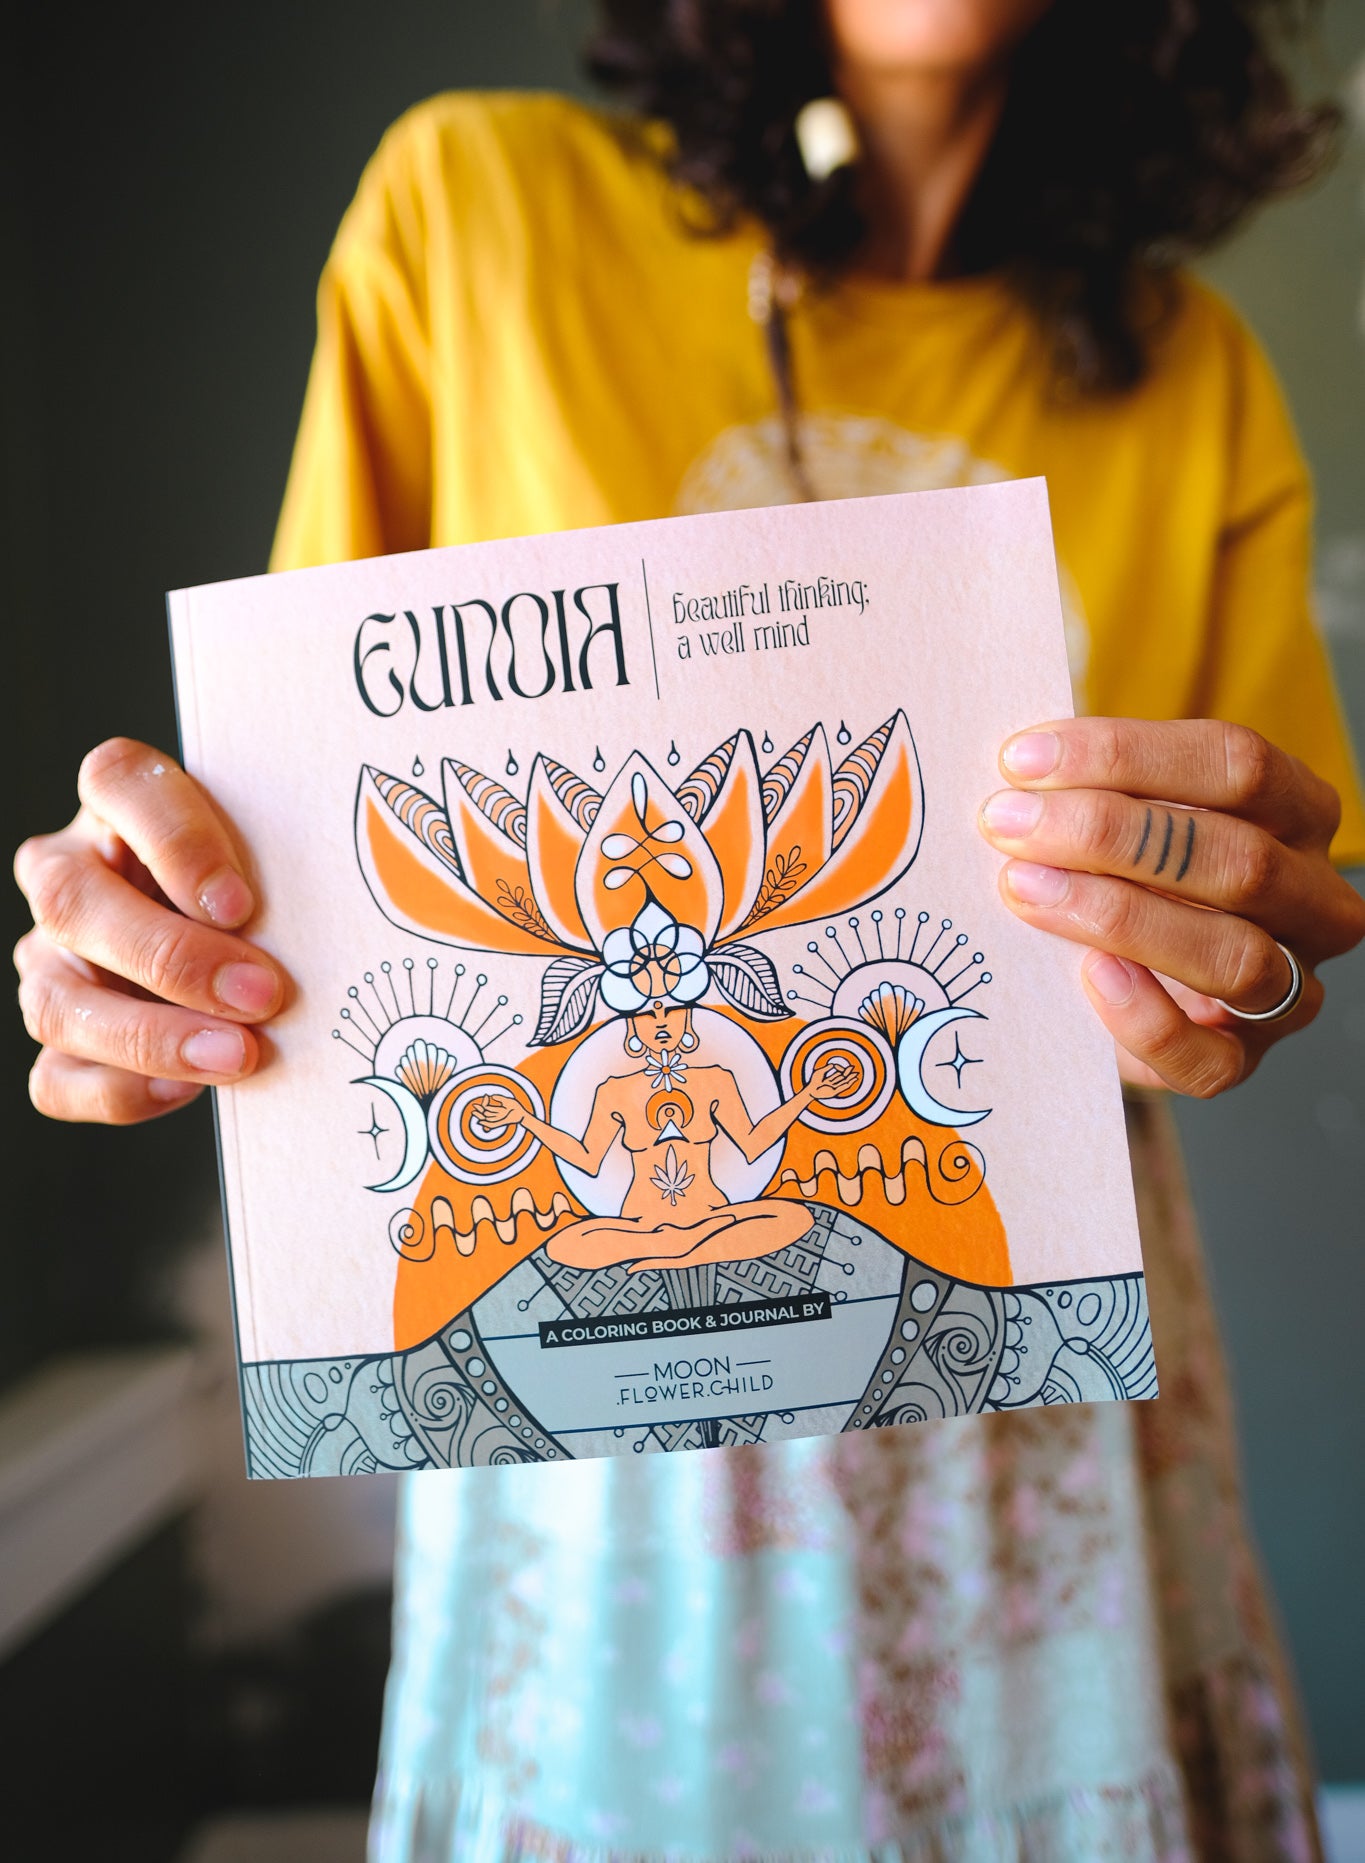 Mindful Coloring Book